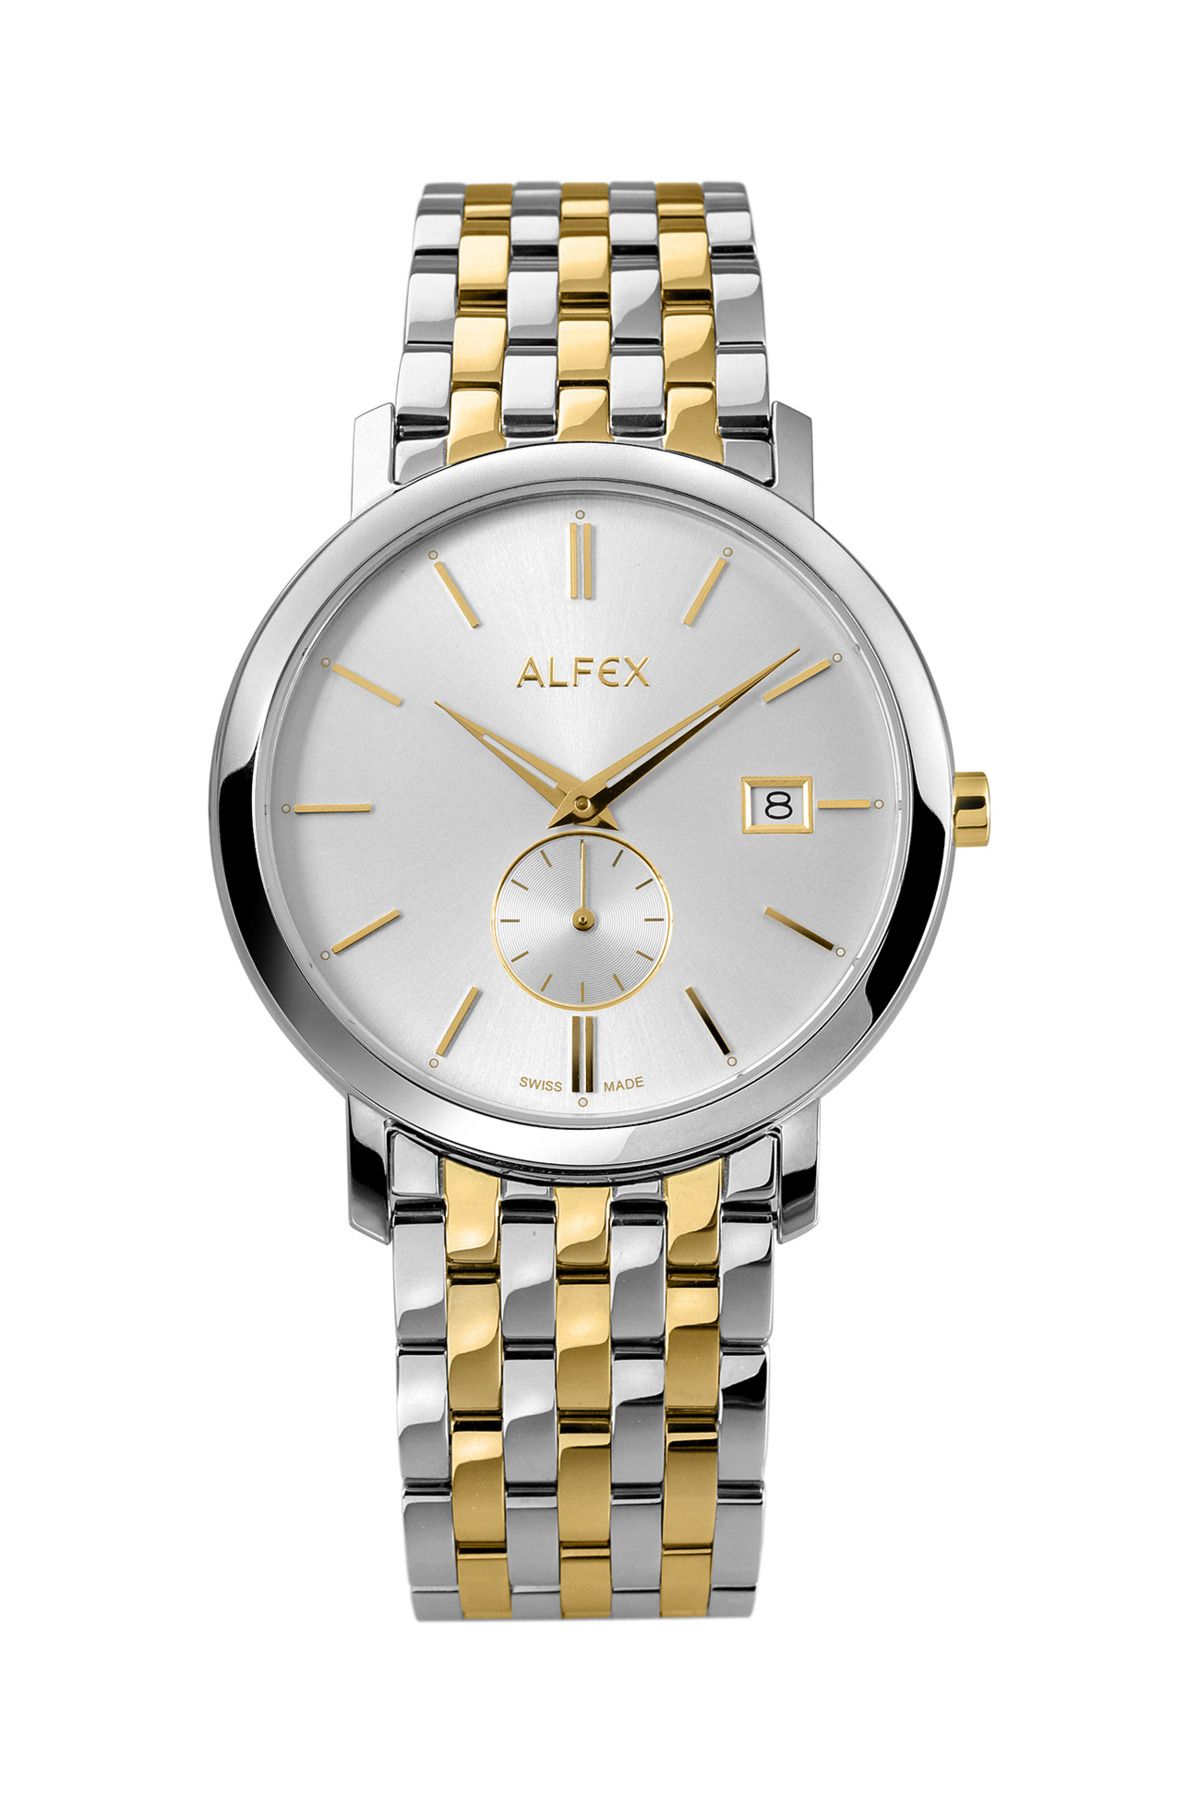 ALFEX By Plum Design Watch Leather Band White Swiss Made 5504-188 Rarity  New | eBay